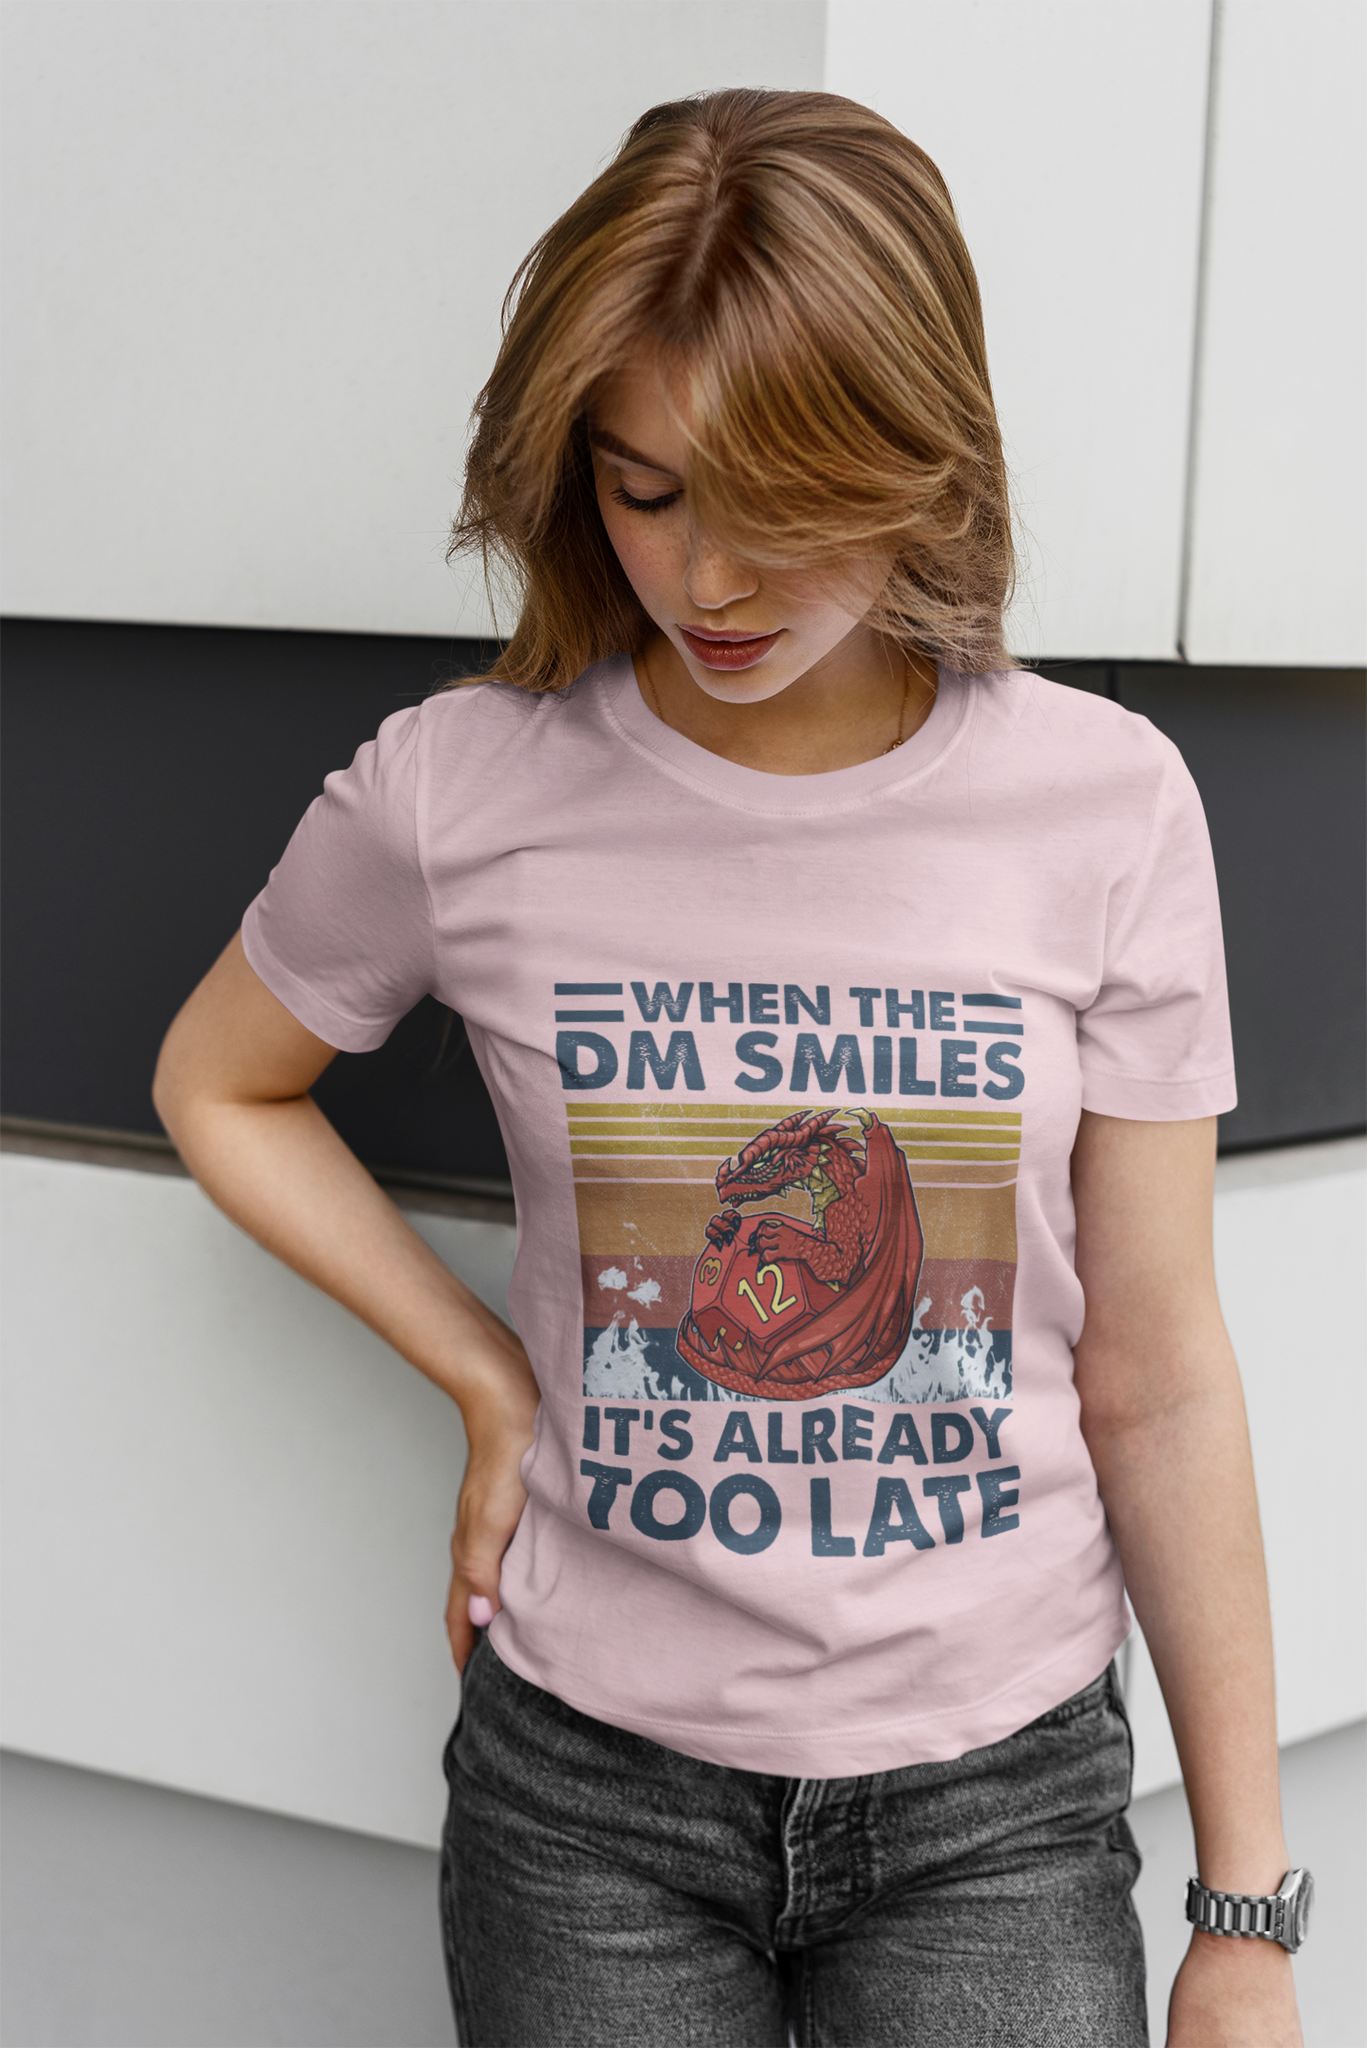 Dungeon And Dragon Vintage T Shirt, RPG Dice Games Tshirt, Red Dragon When The Dm Smiles Its Already Too Late T Shirt